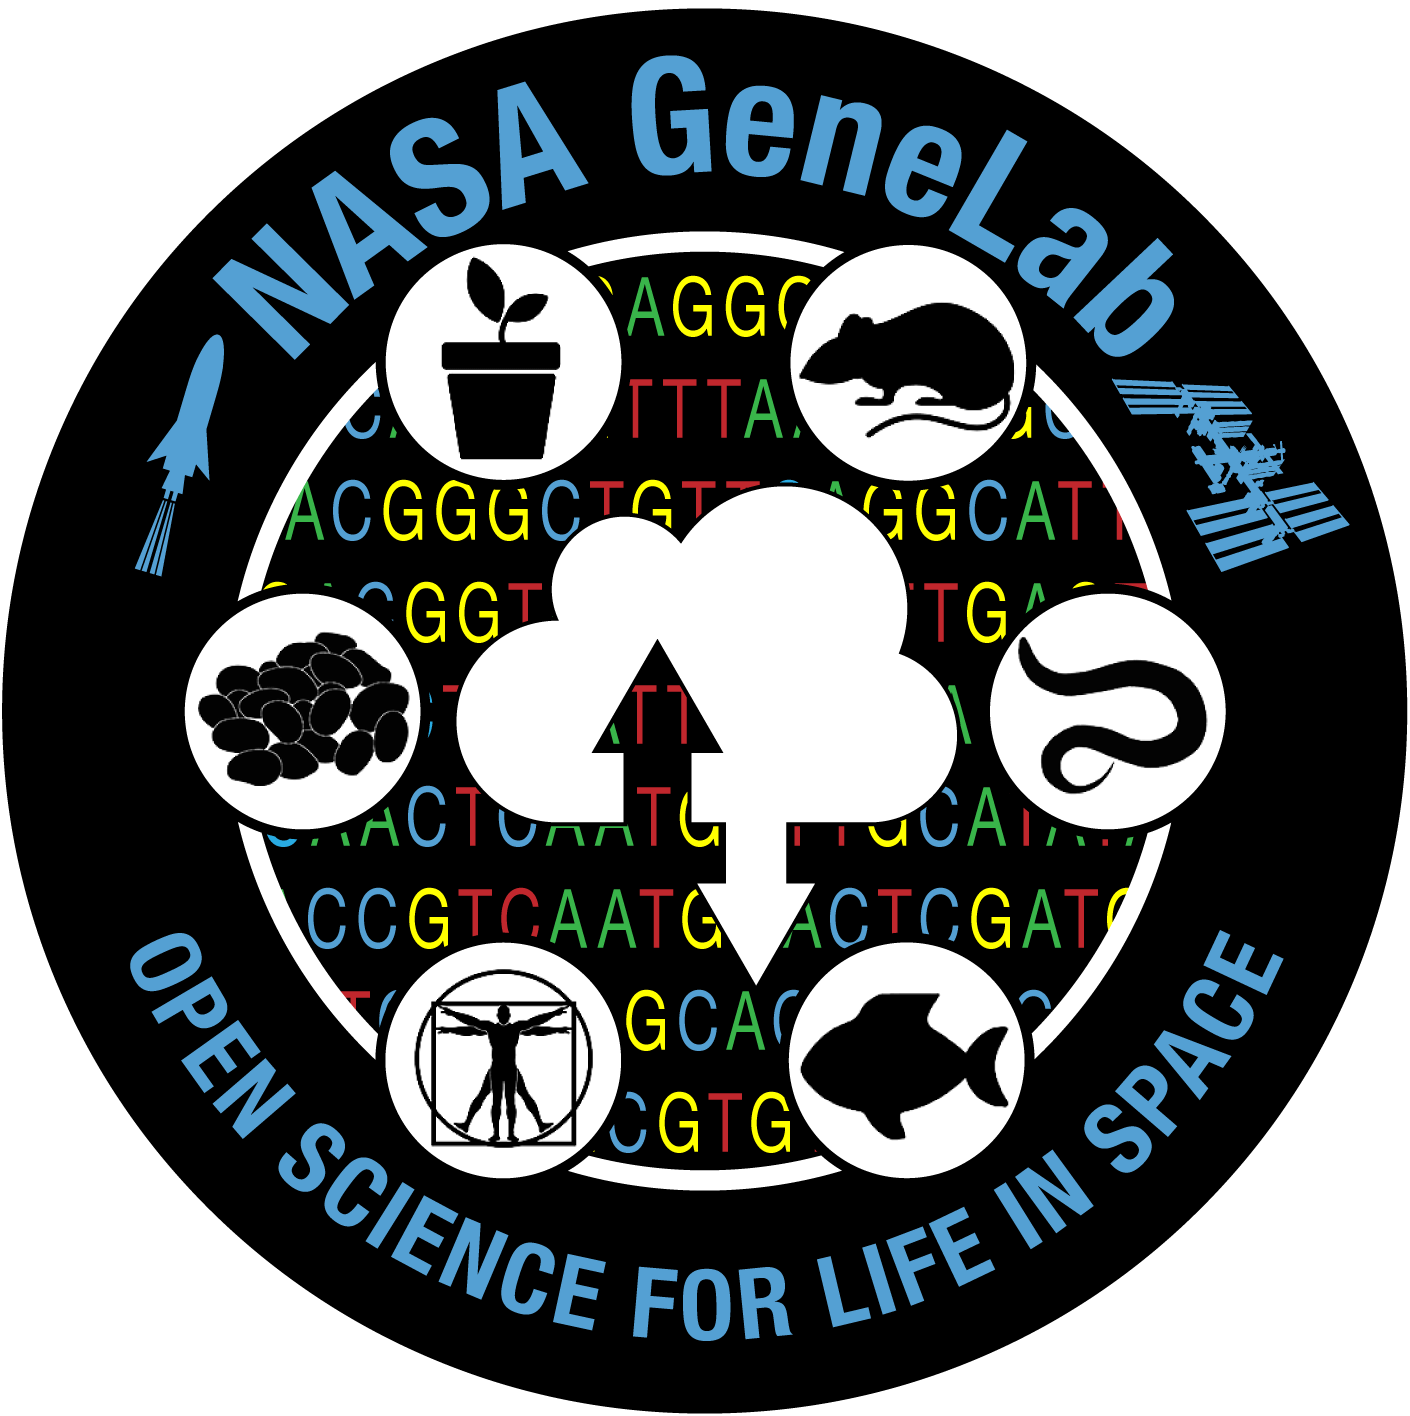 NASA GeneLab – Open Science for Life in Spac